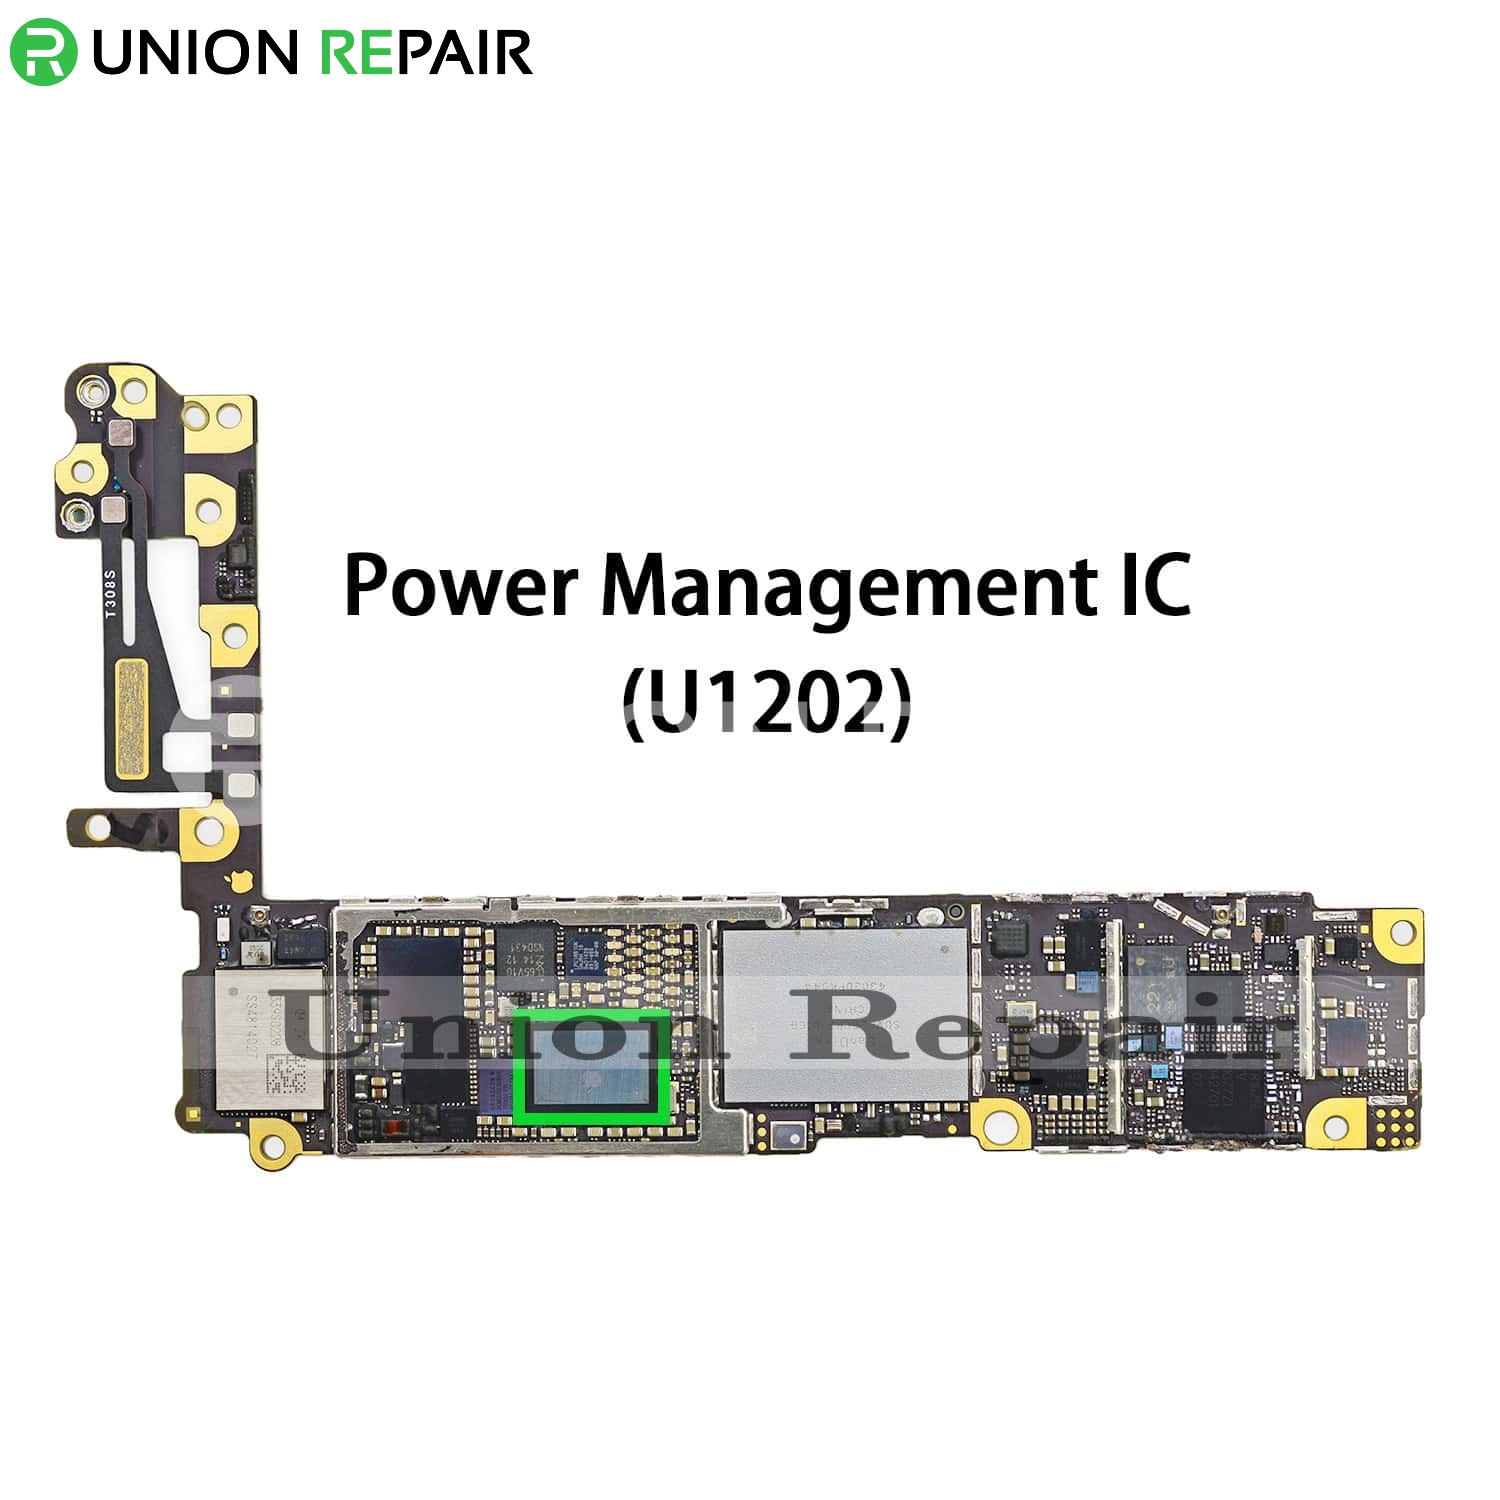 Last Day liver Replacement for iPhone 6/6 Plus PM8019 Power Management IC